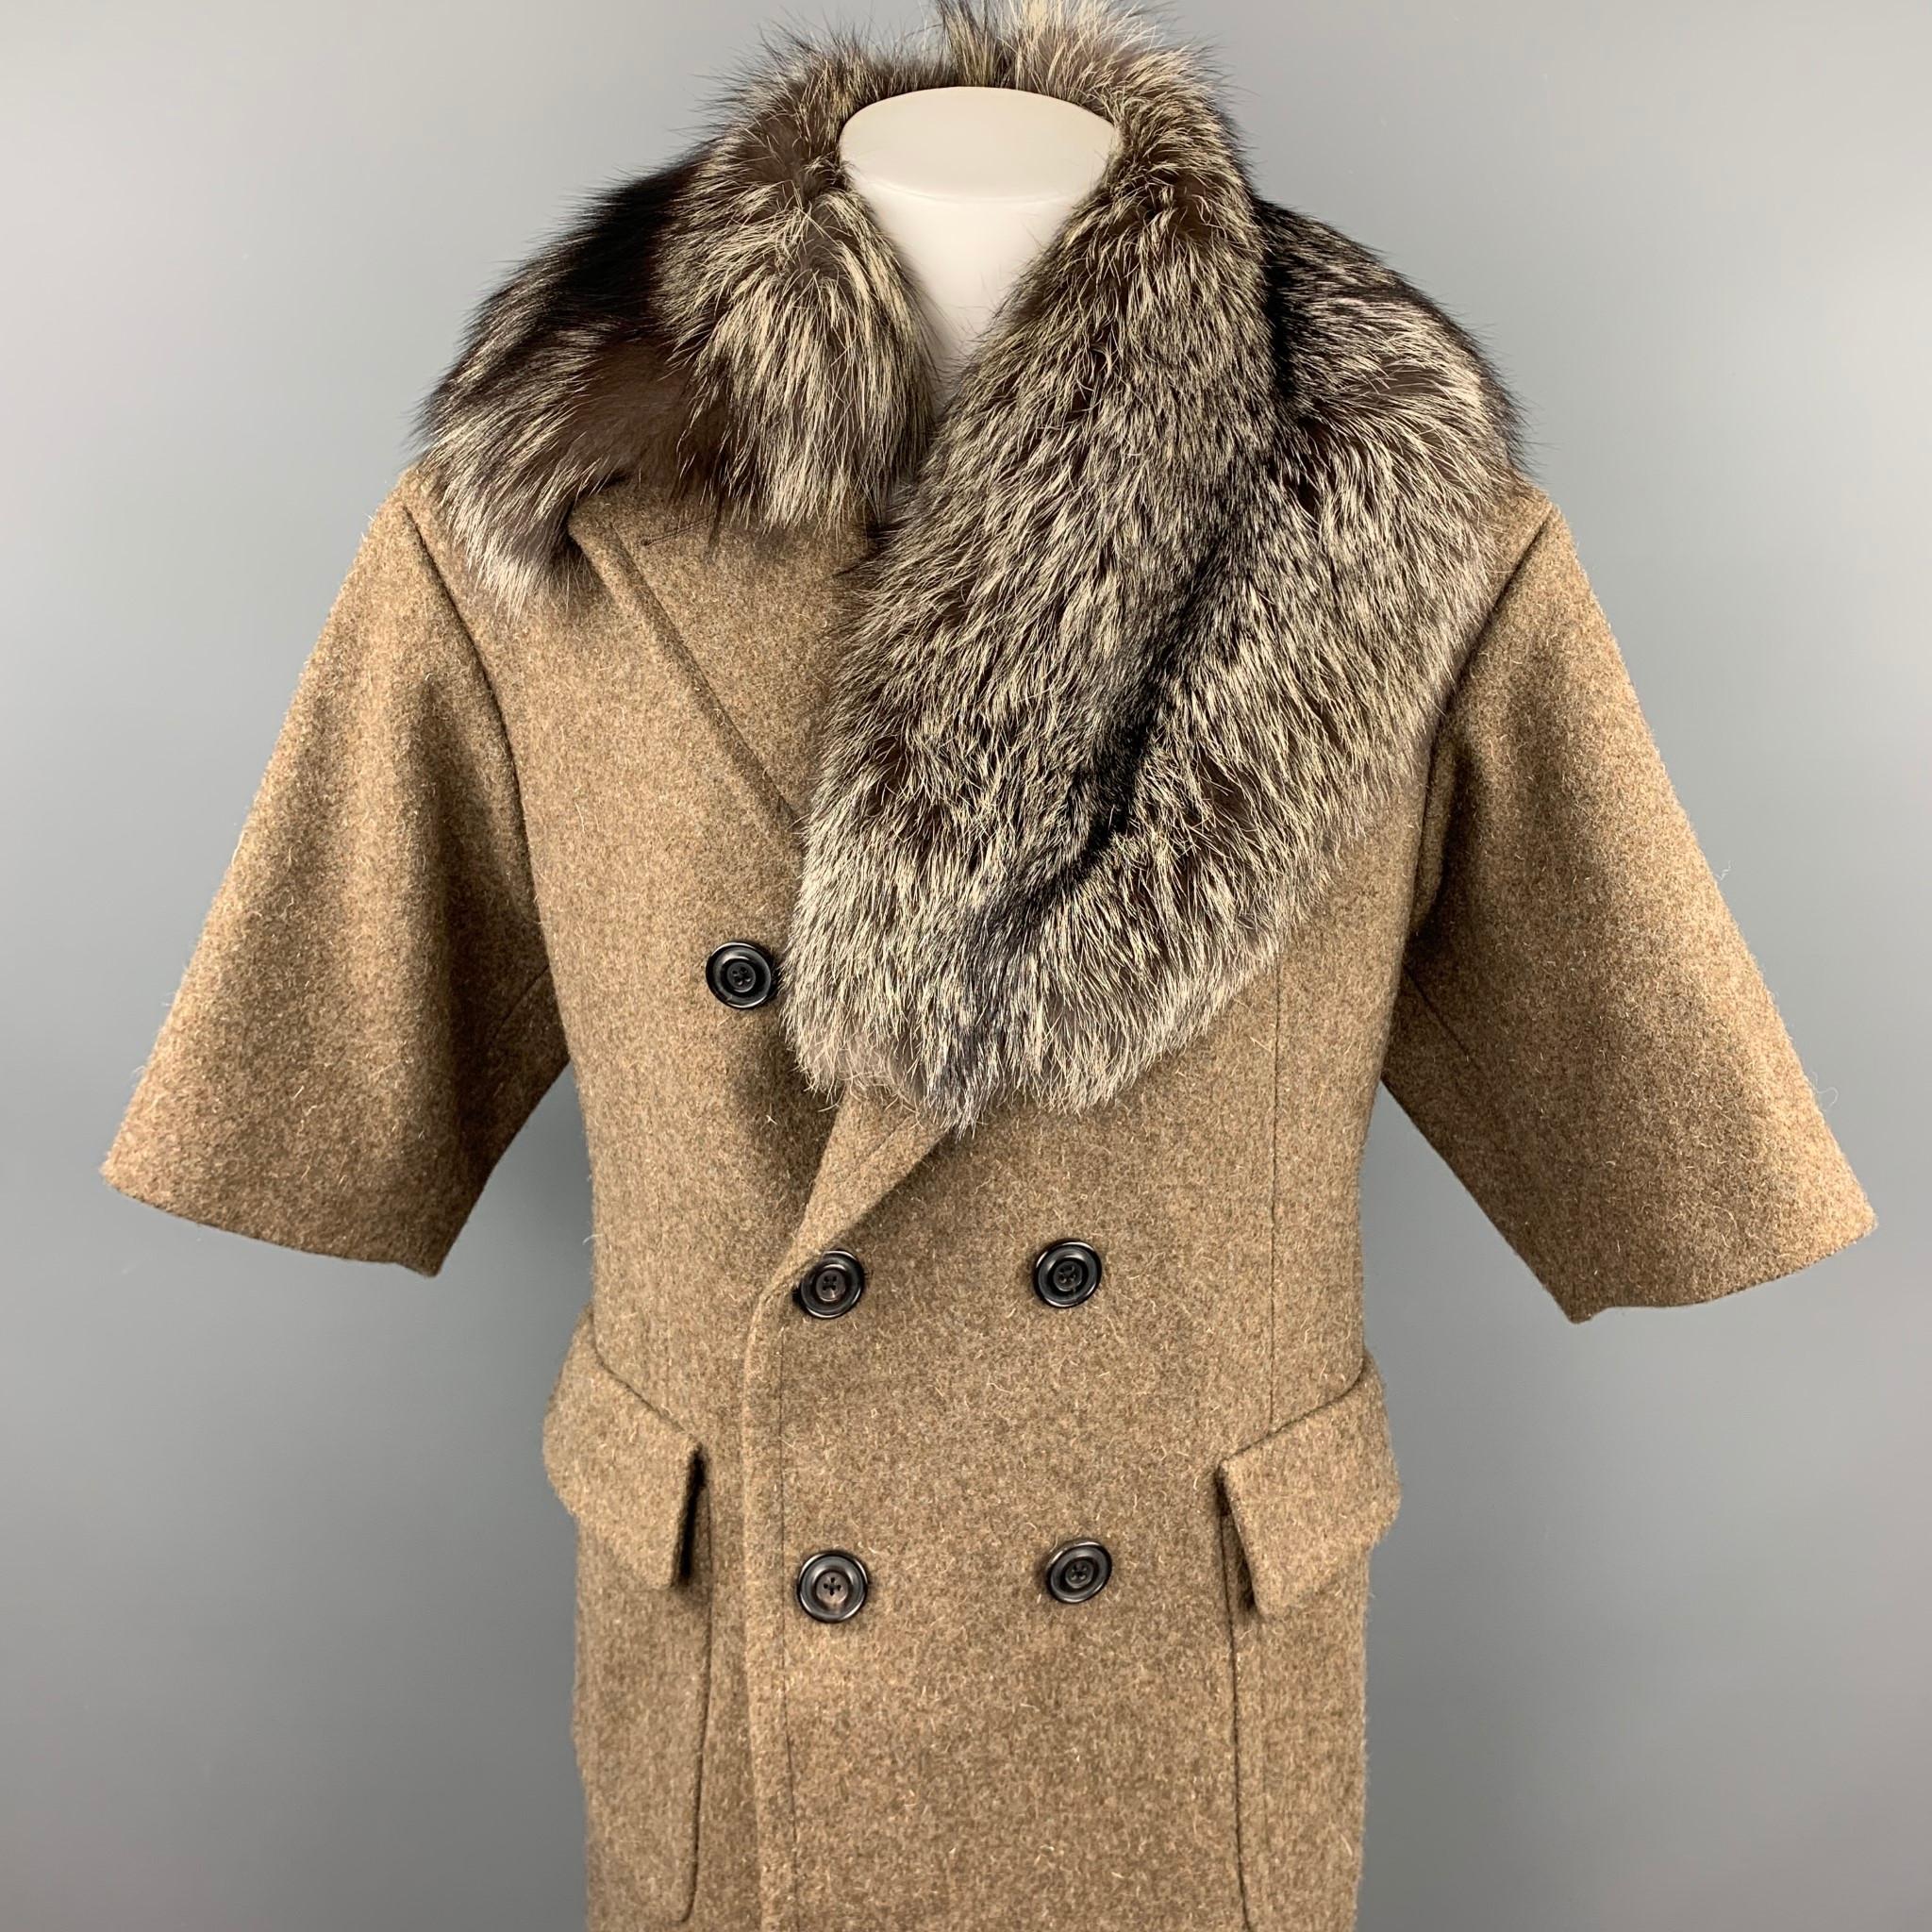 WOOSTER + LARDINI coat comes in a taupe textured wool with a silver fox fur collar featuring a notch lapel, short sleeves, flap pockets, back buttoned vent, and a double breasted closure. Made in Italy.

Excellent Pre-Owned Condition.
Marked: IT